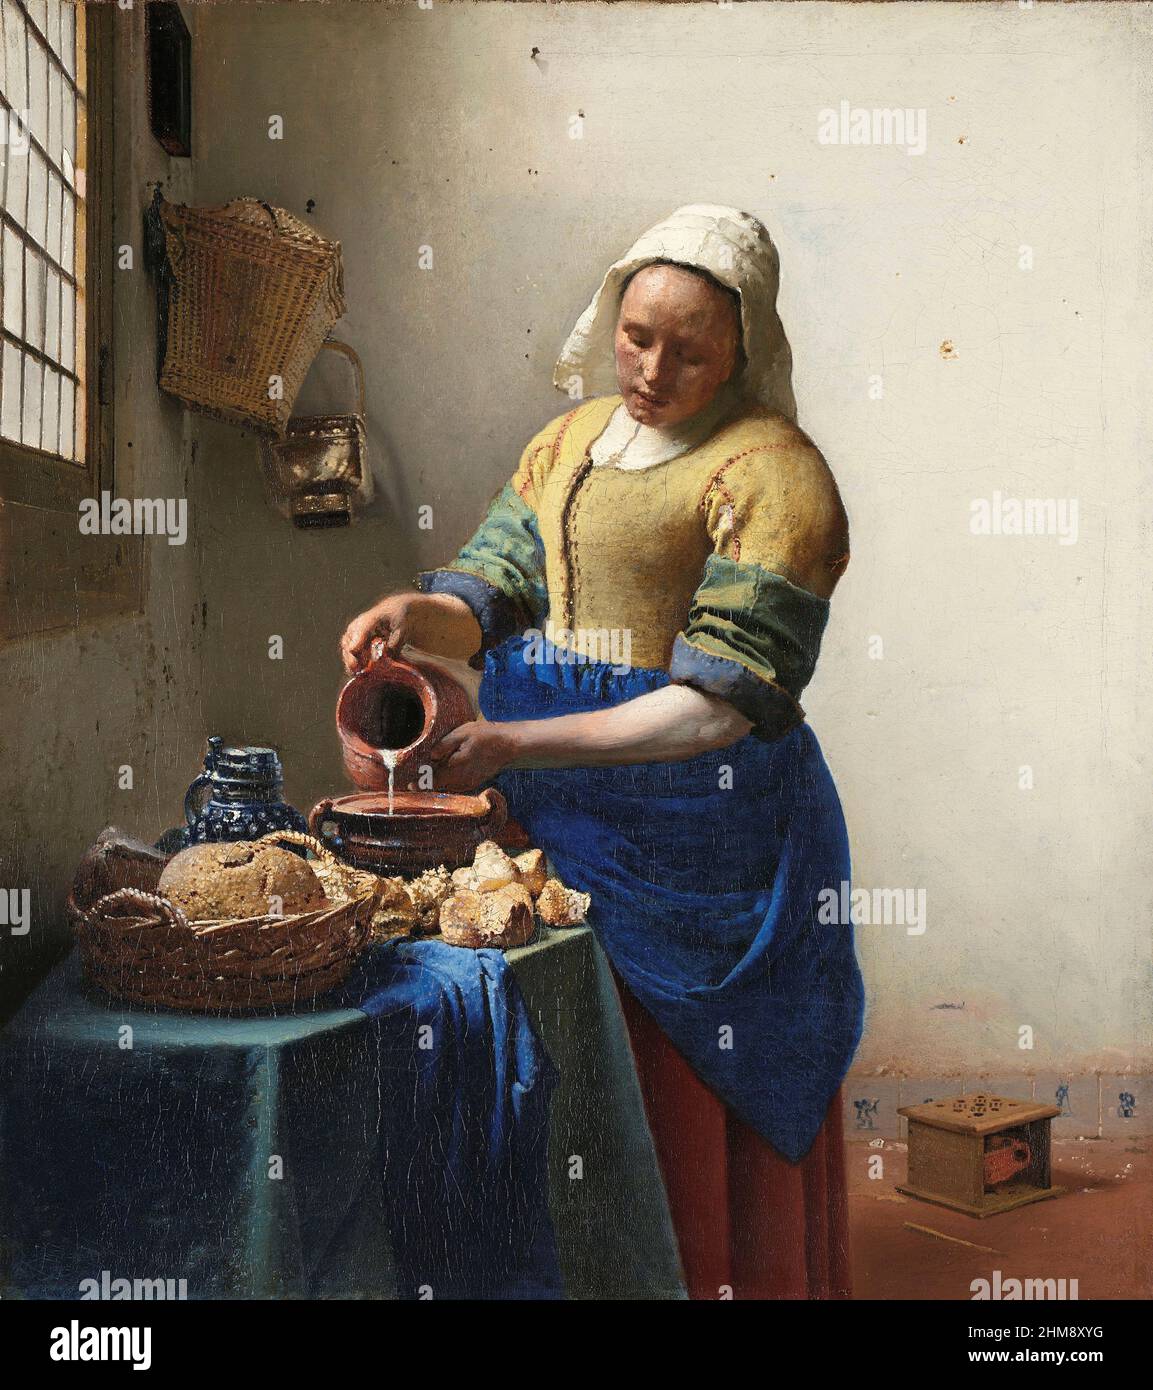 The Milkmaid by Dutch Baroque Period artist Johannes Vermeer, 1632 - 1675.  On display in the Rijksmuseum, Amsterdam, Netherlands. Stock Photo